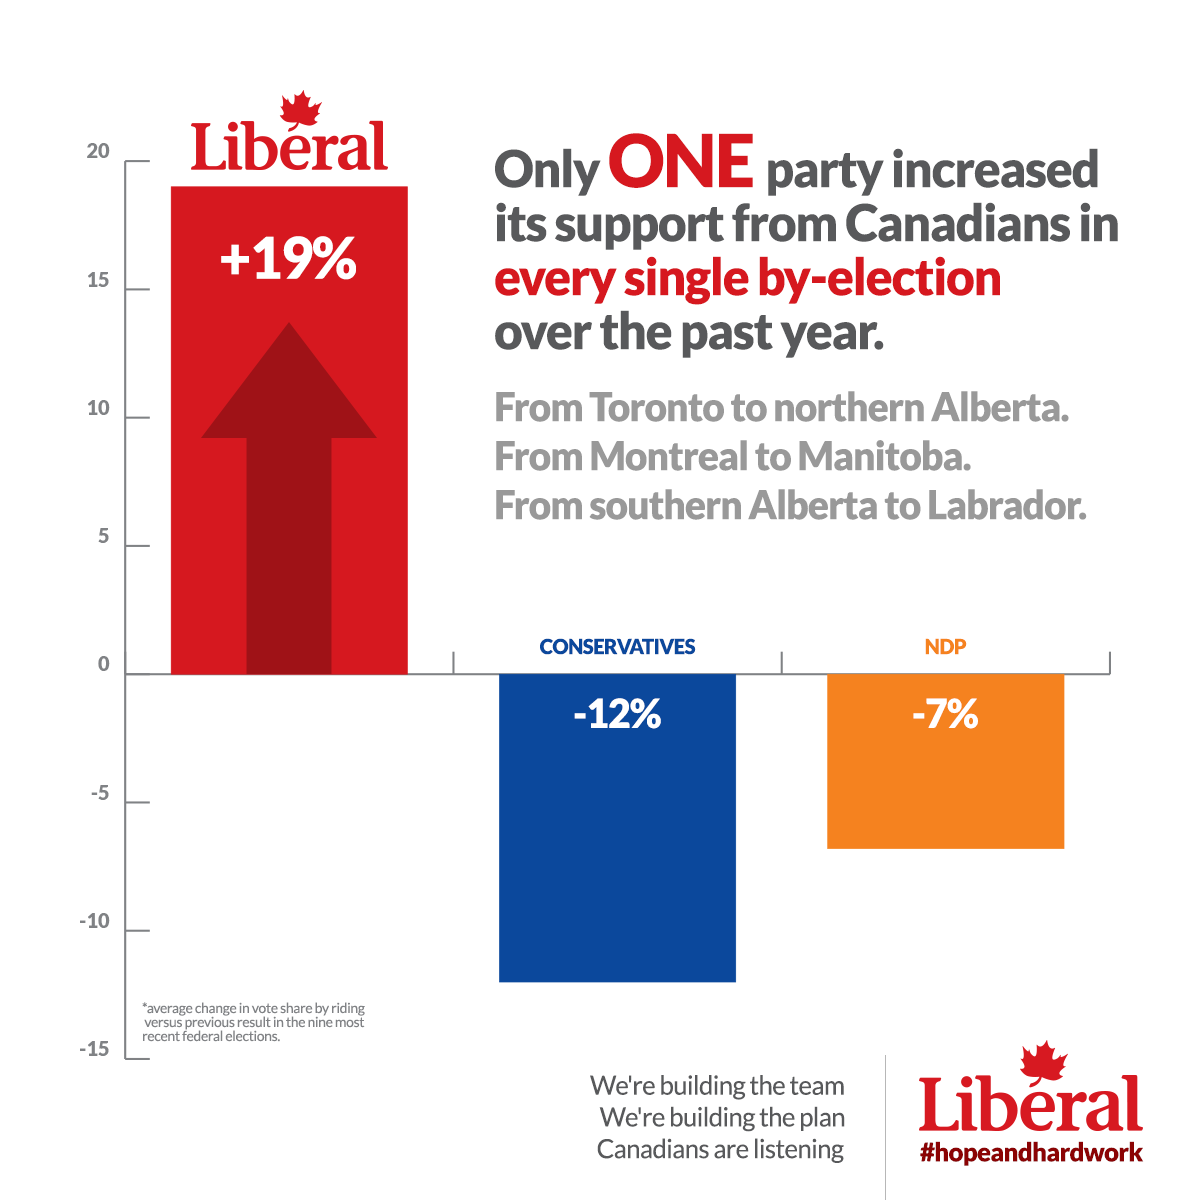 Only ONE party increased its support from Canadians in every single by-election over the past year, from Toronto to northern Alberta, from Montreal to Manitoba, from southern Alberta to Labrador!